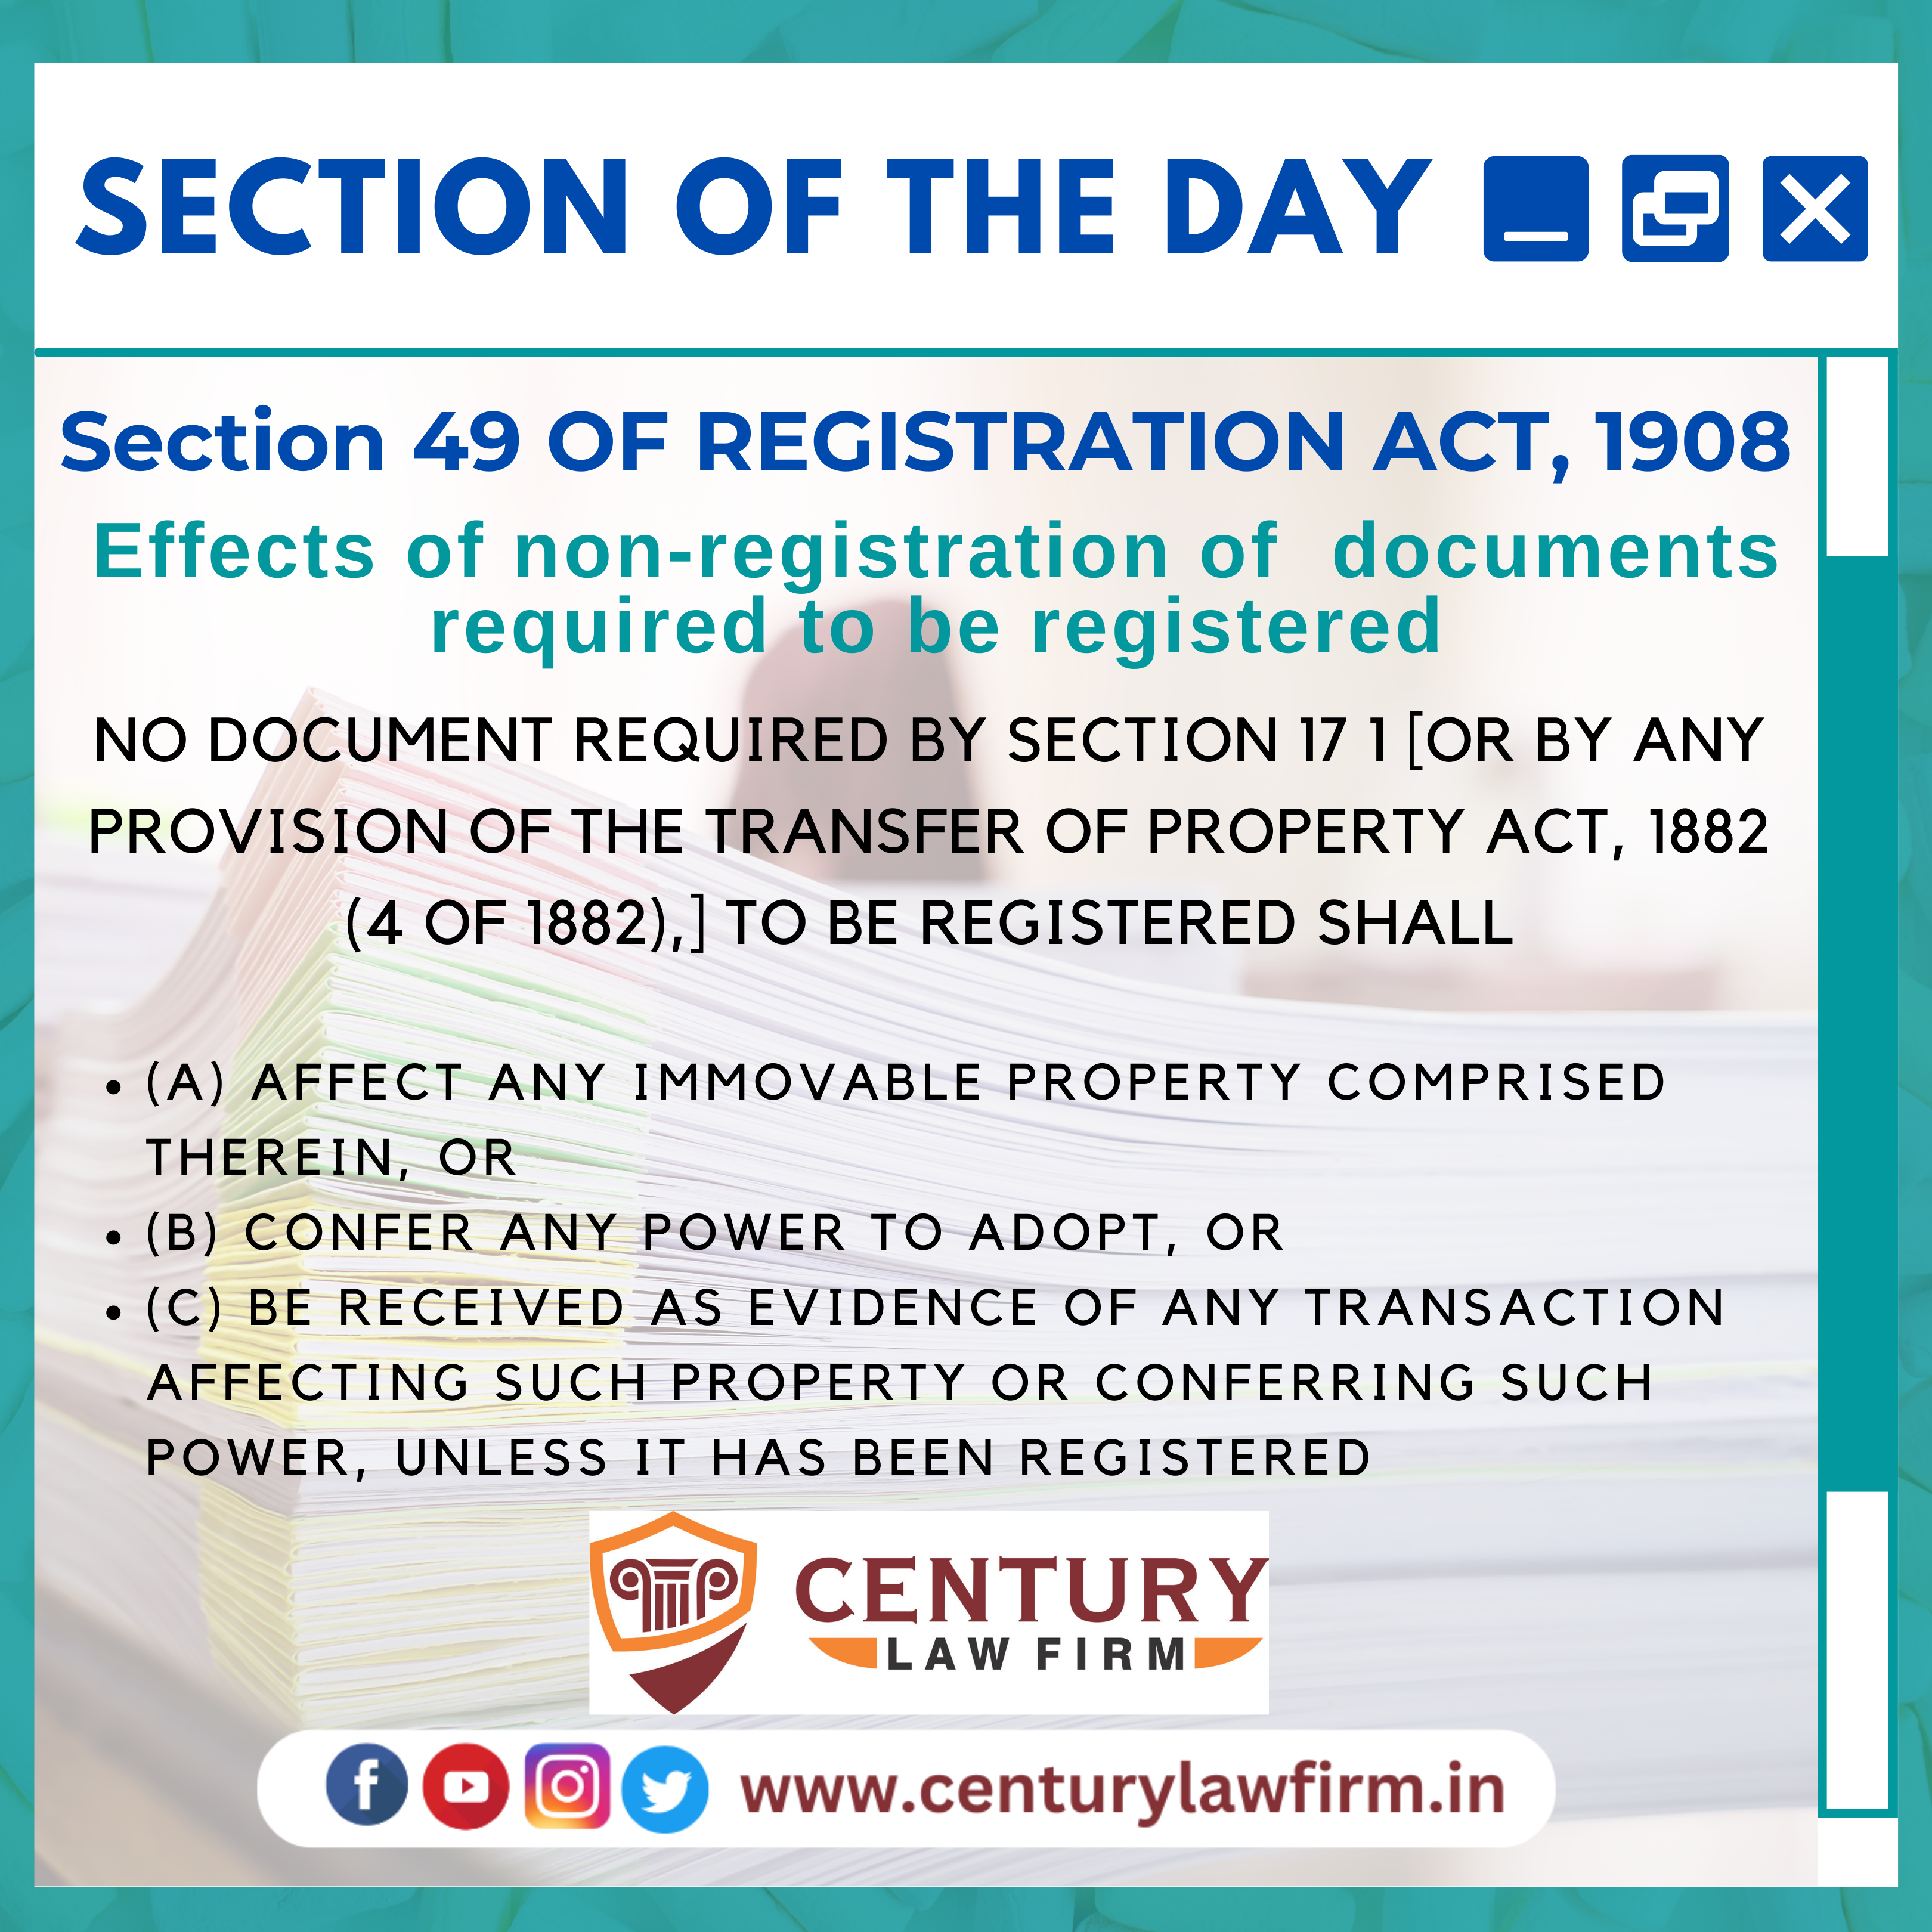 section-49-of-registration-act-1908---section-of-the-day